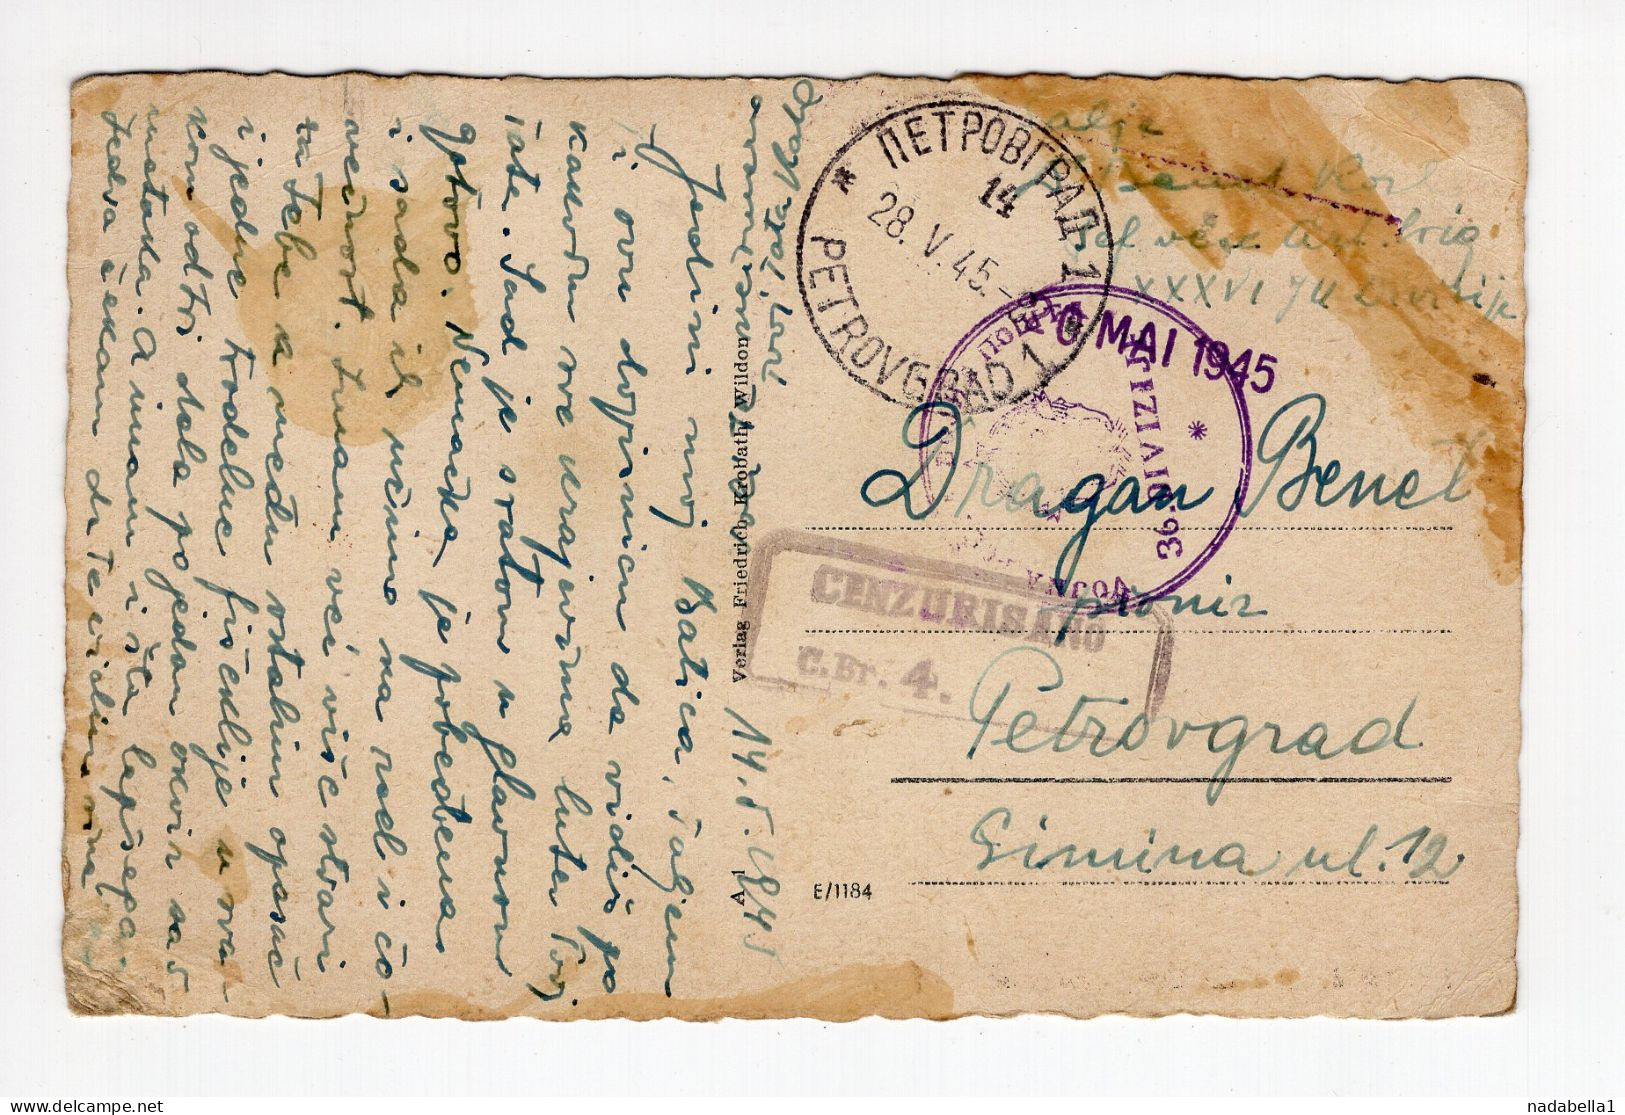 14.5.1945. YUGOSLAVIA,MILITARY,PARTIZAN MAIL,CENSOR,36 DIVISION,FROM FRONT LINE,AUSTRIA? TO SERBIA,POSTCARD,USED - Brieven En Documenten